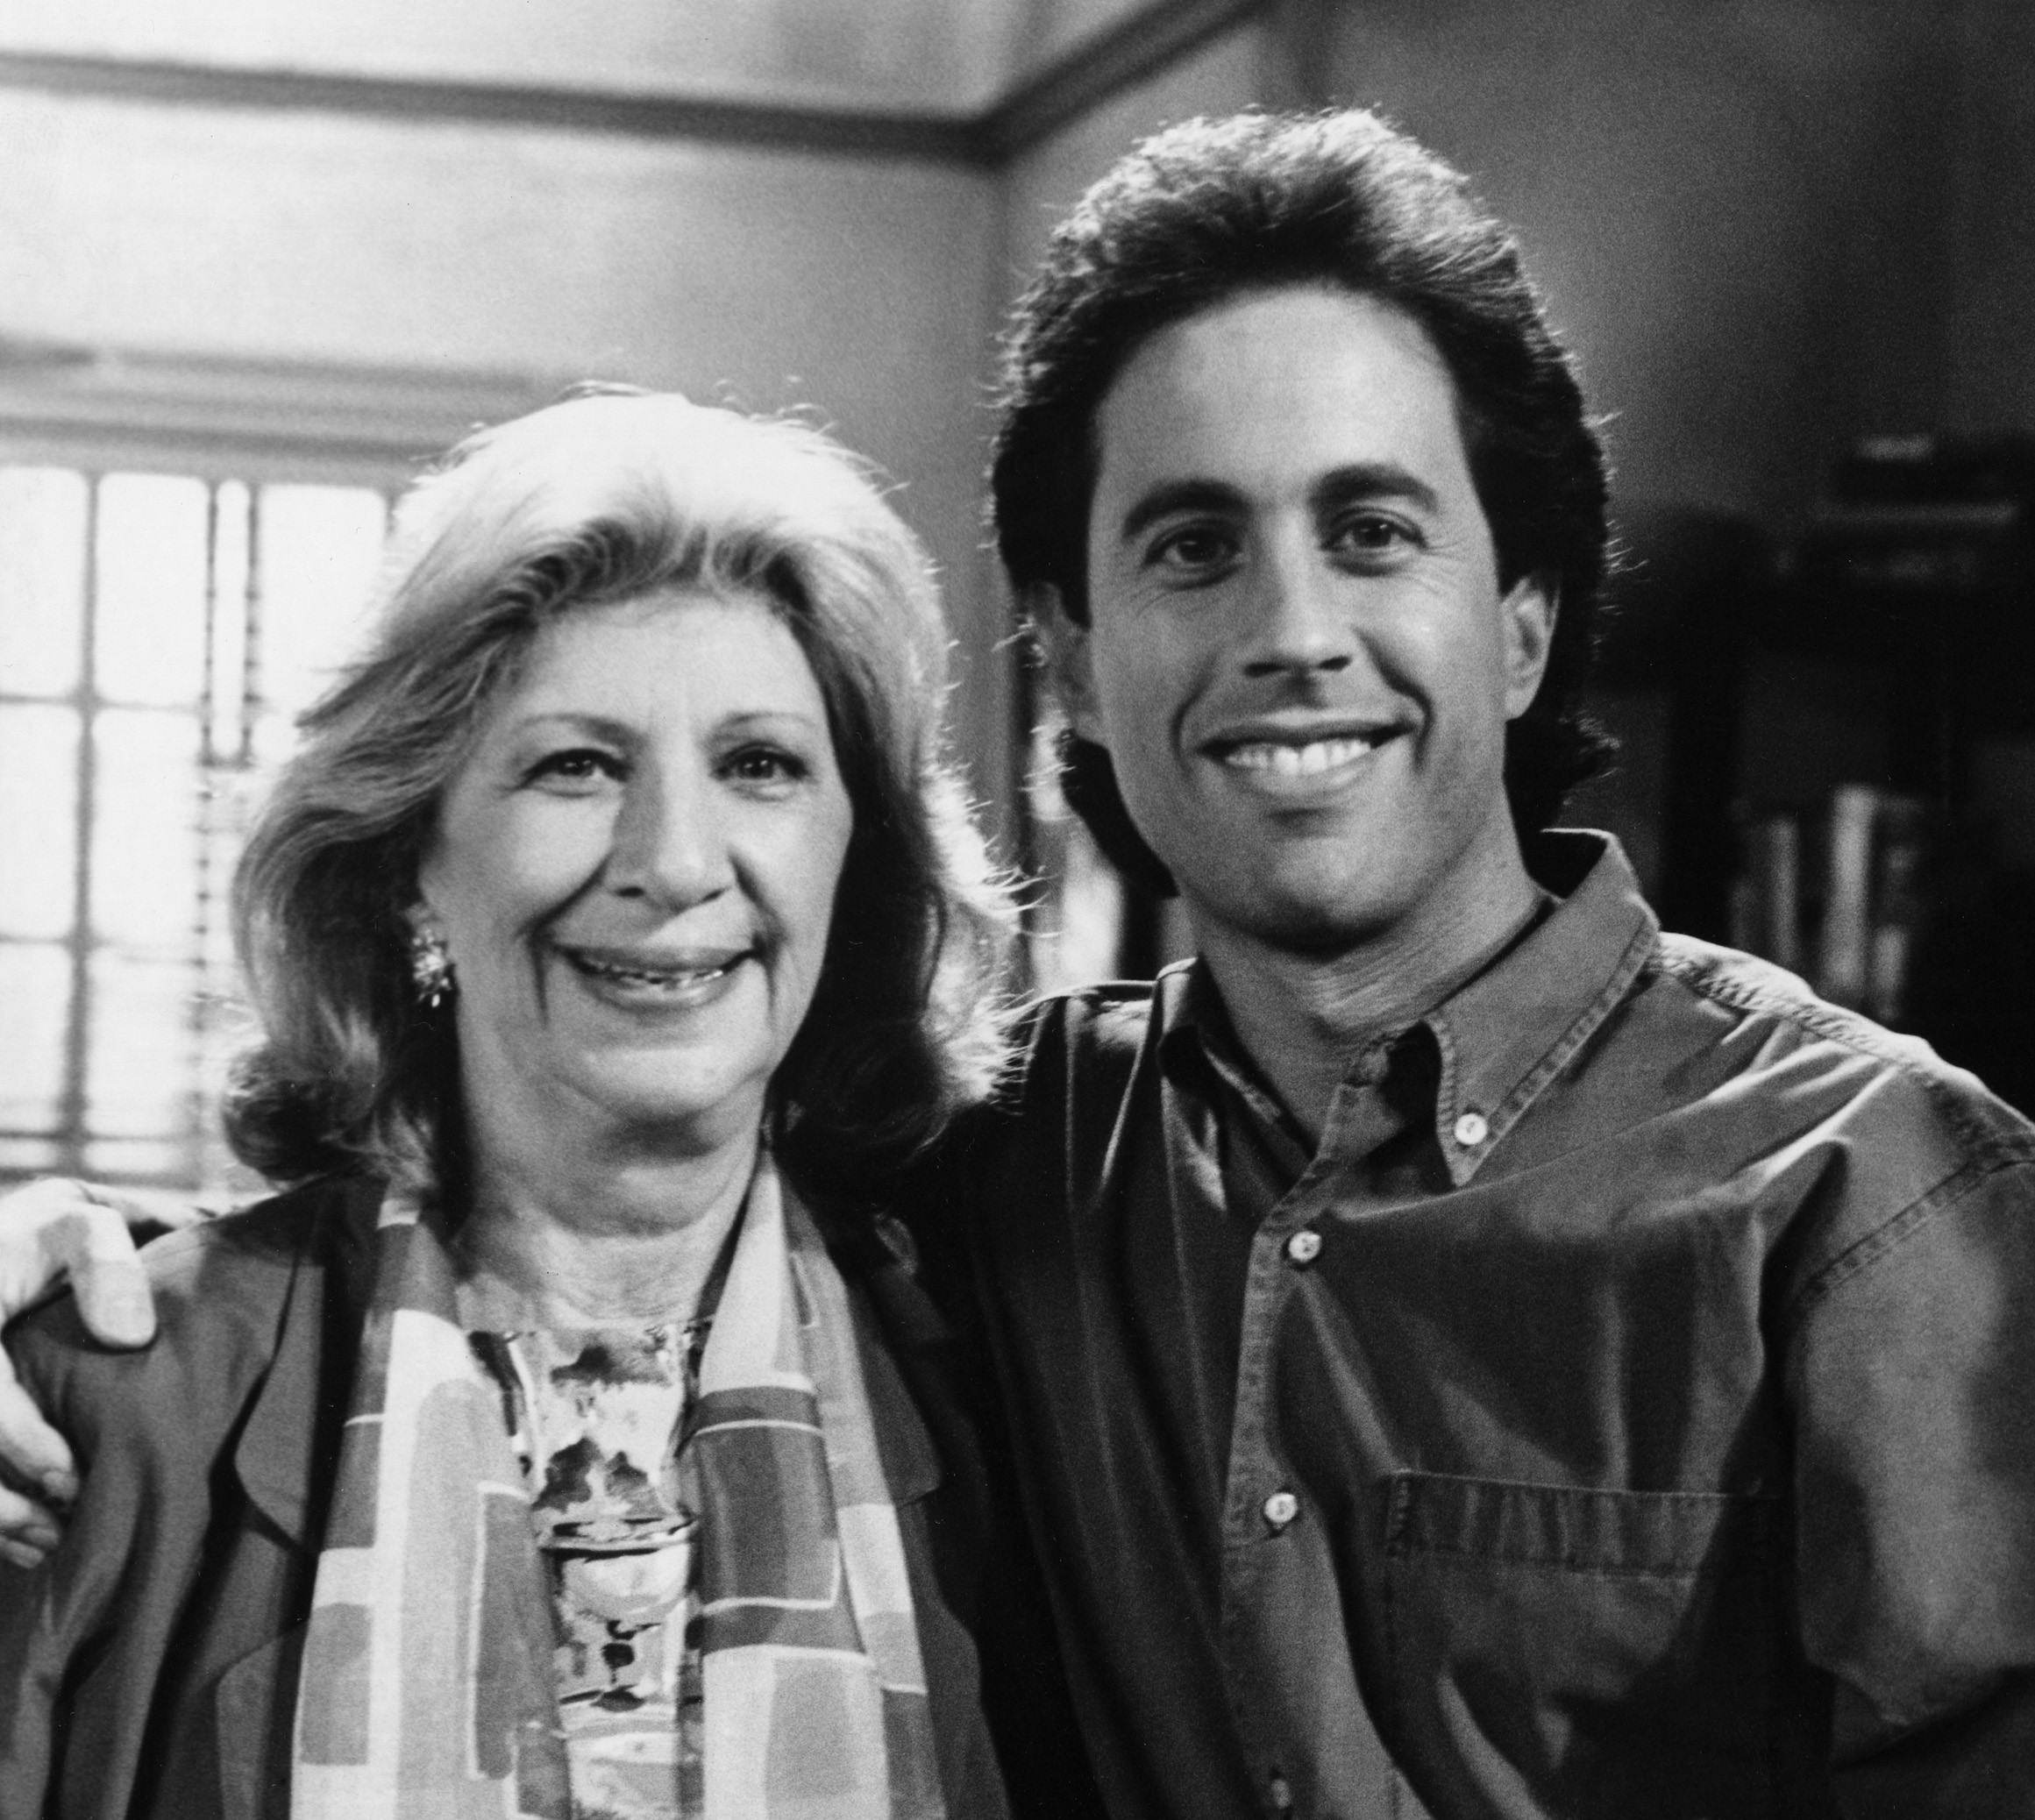 SEINFELD -- Pictured: (l-r) Liz Sheridan as Helen Seinfeld, Jerry Seinfeld as Jerry Seinfeld  (Photo by NBCU Photo Bank/NBCUniversal via Getty Images via Getty Images) (Foto: NBCUniversal via Getty Images)